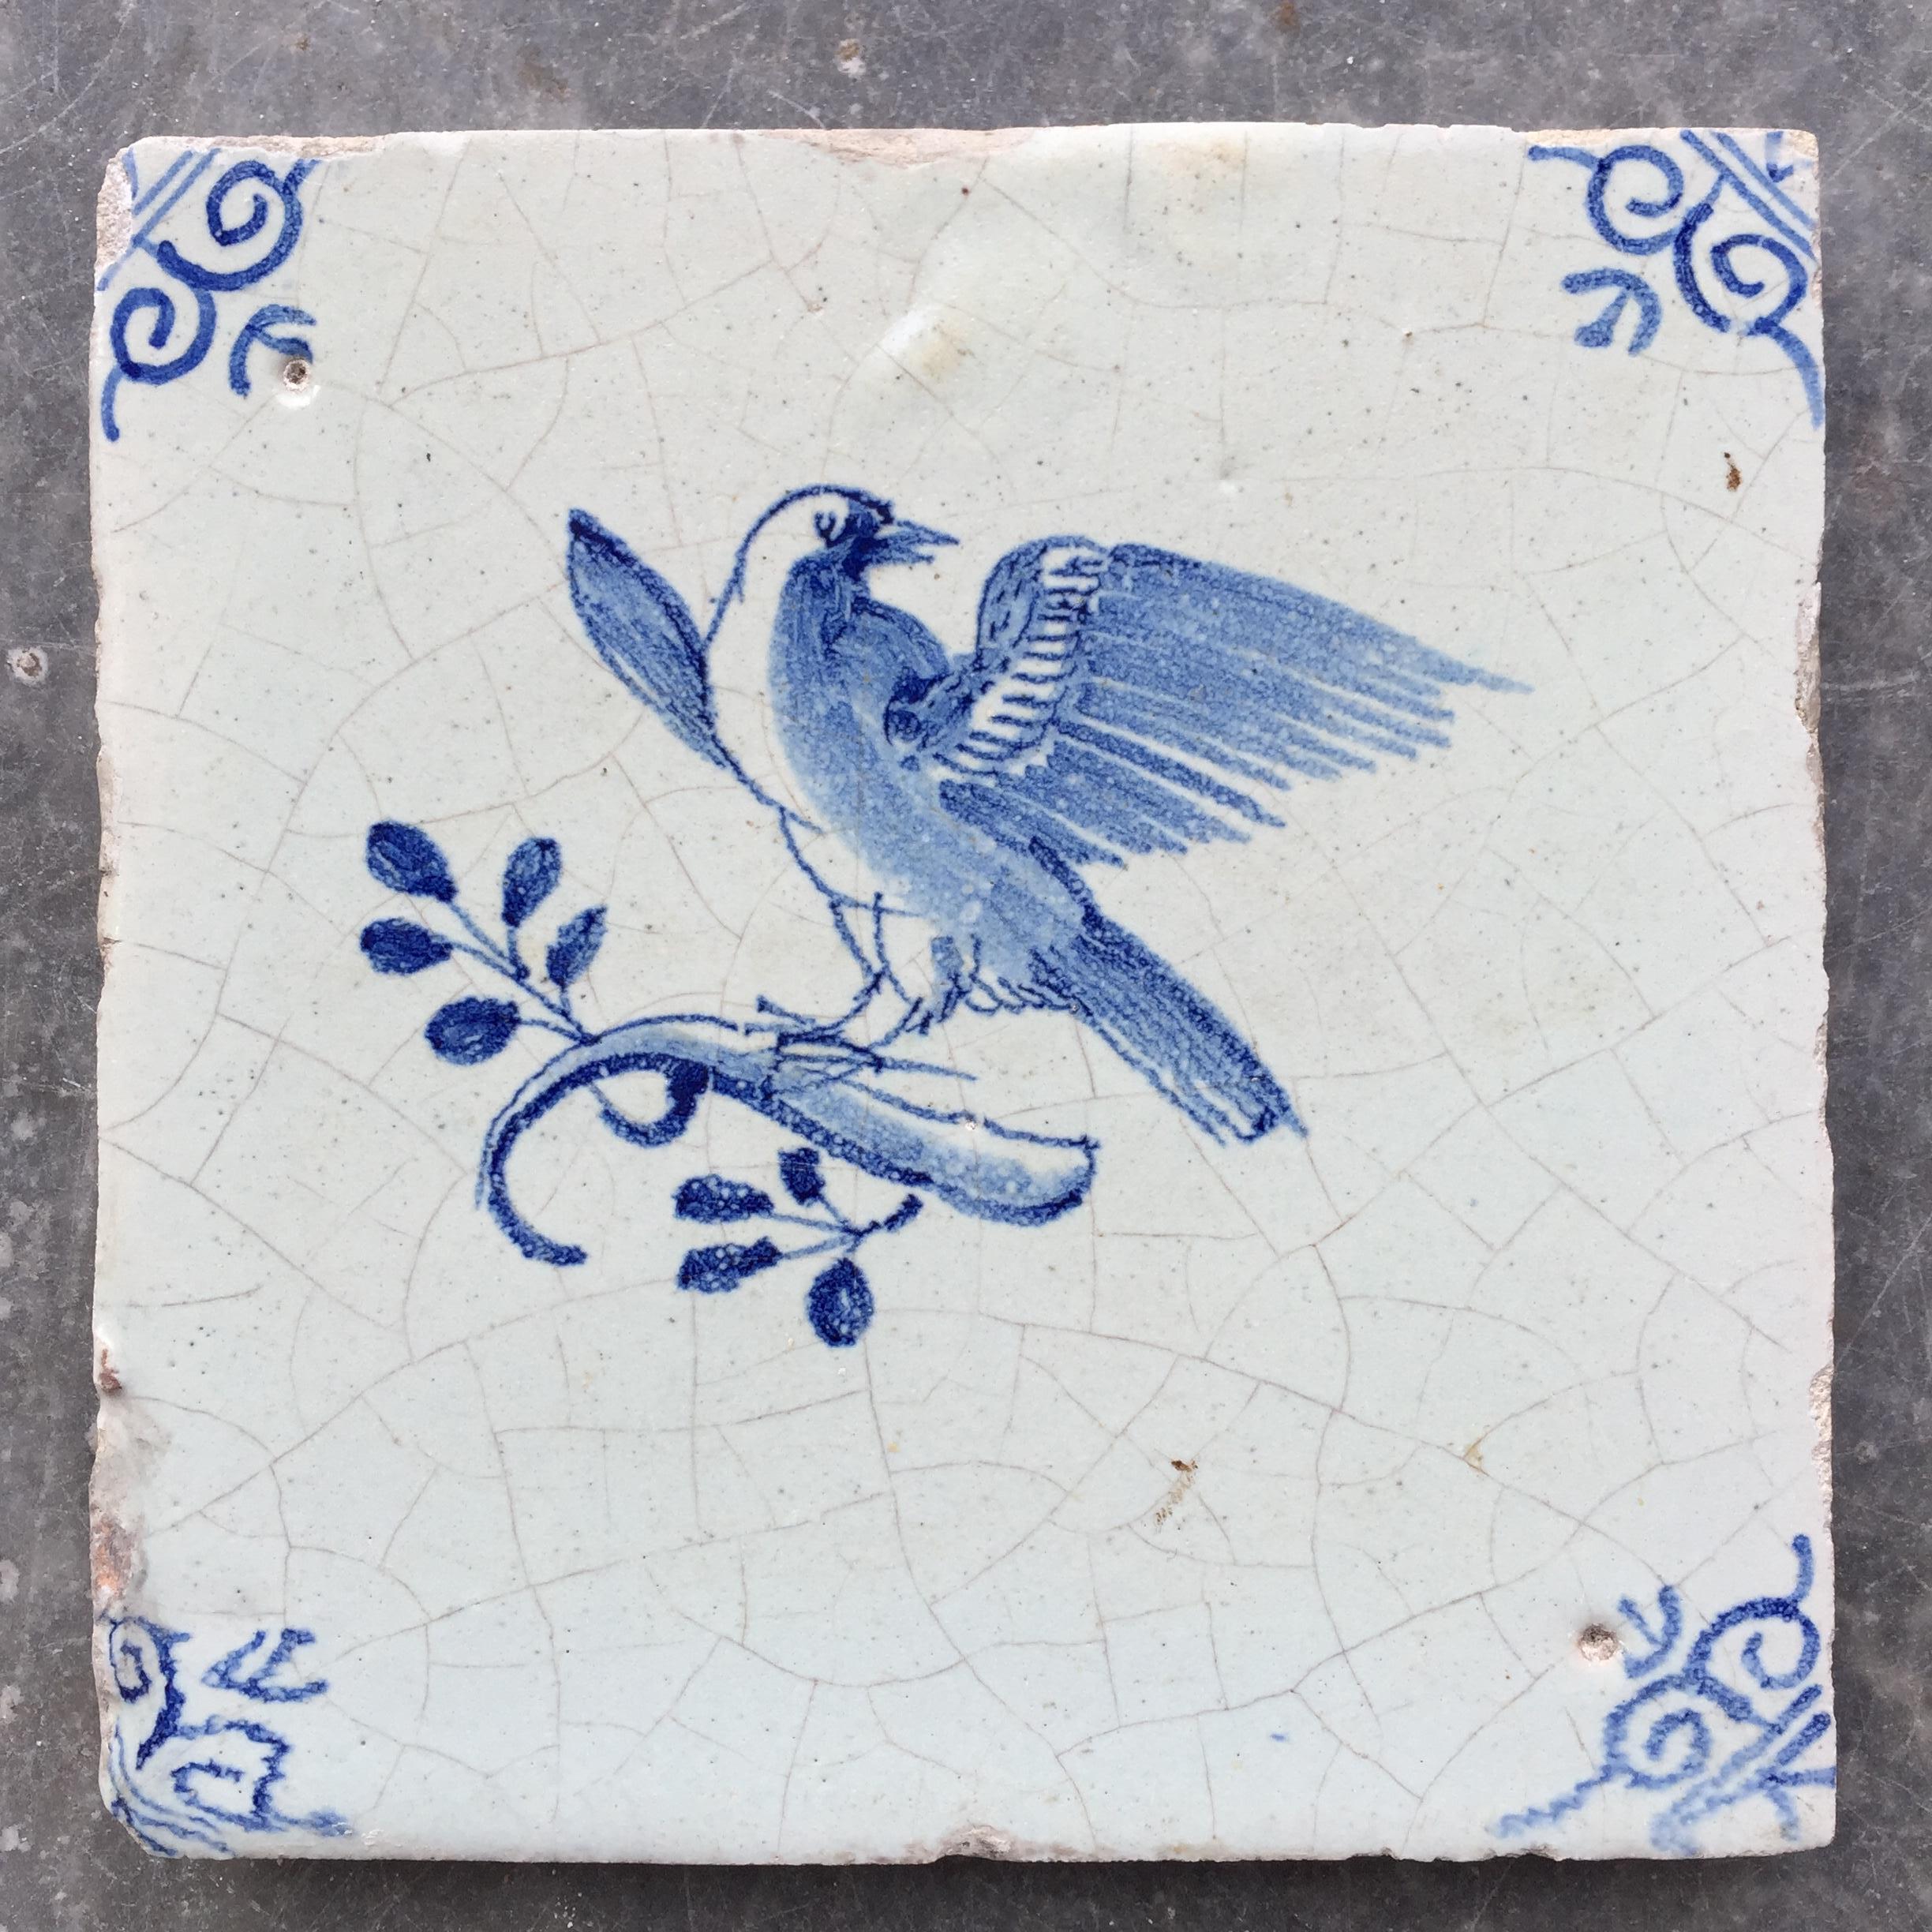 The Netherlands
Circa 1630 - 1660

A beautiful and clear blue and white tile with a bird on a branch.
With oxheads as corner decoration.

A genuine collectible of approximately 400 years old.